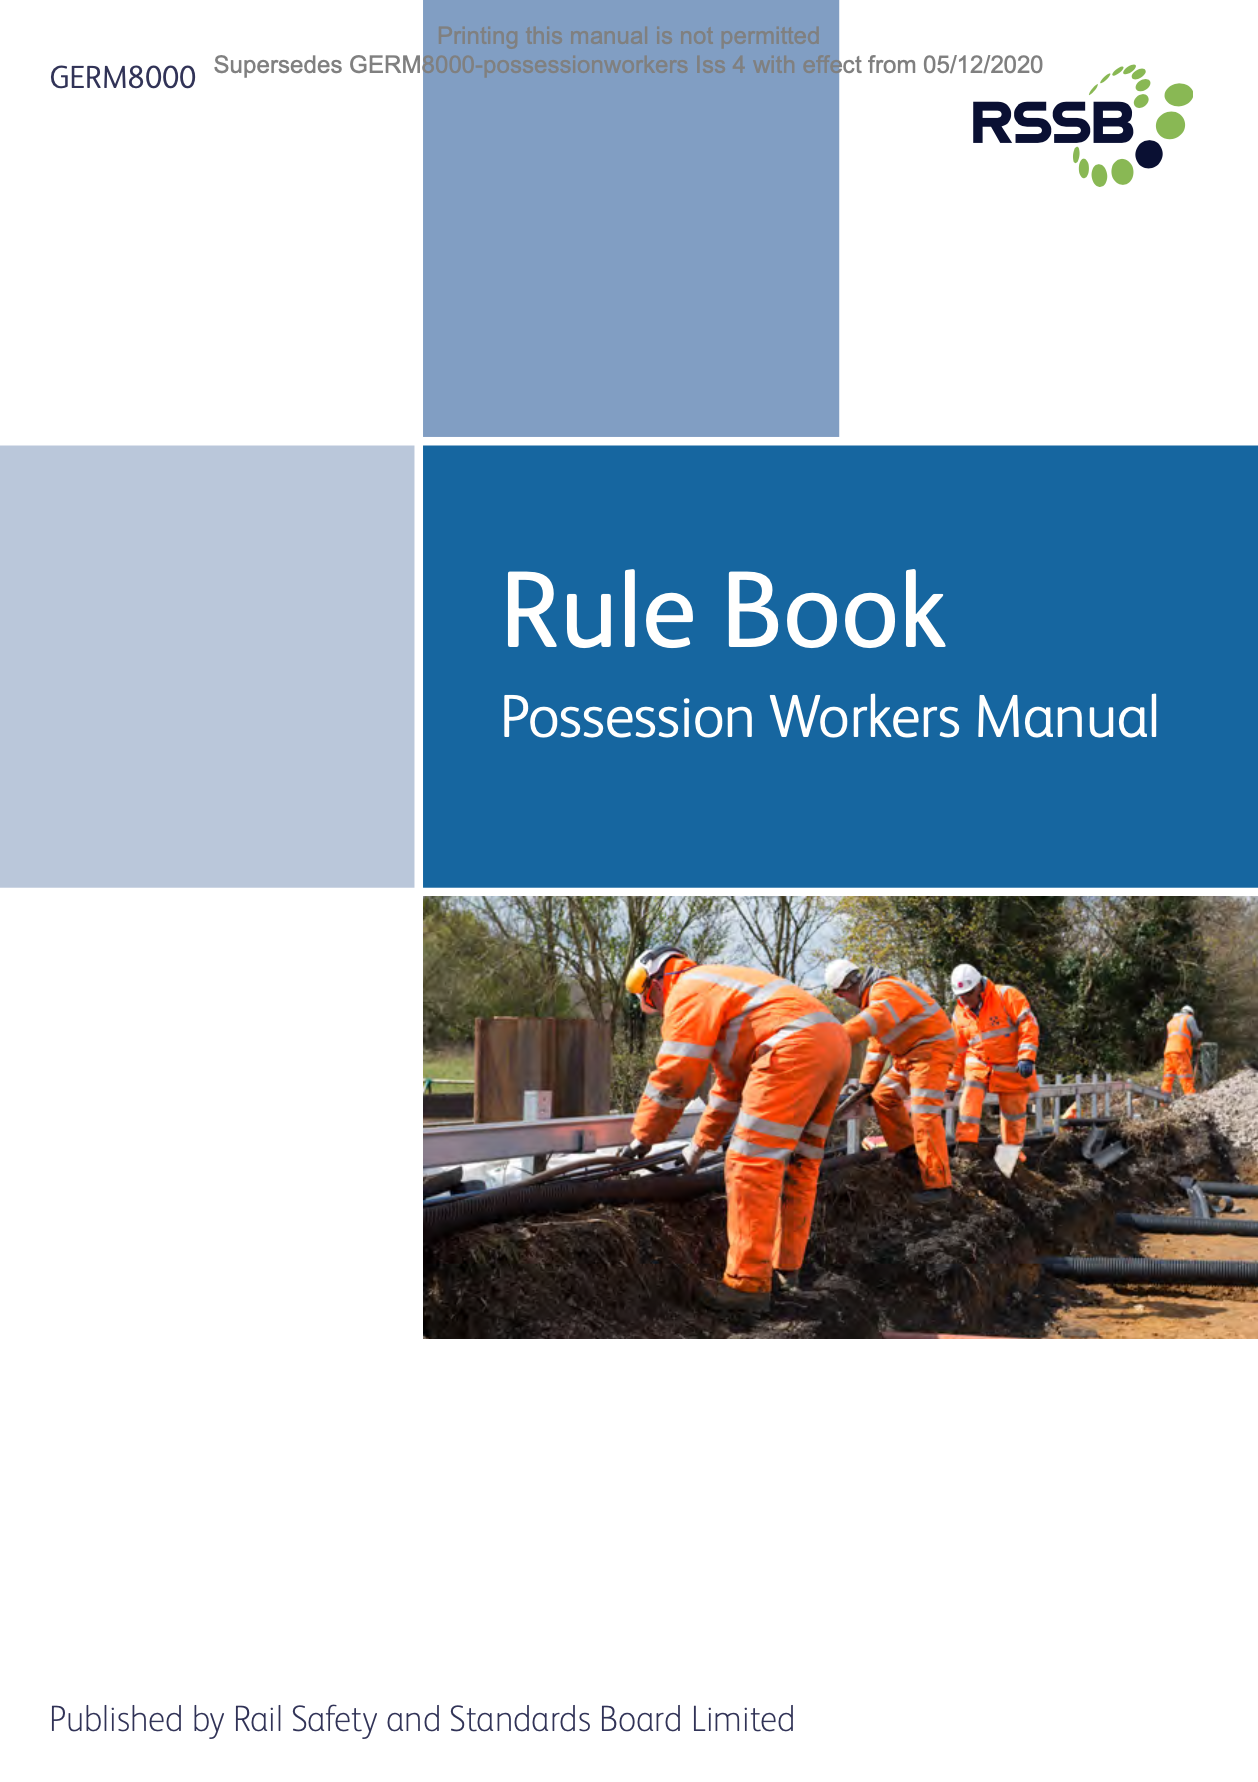 Possession Workers Manual Cover